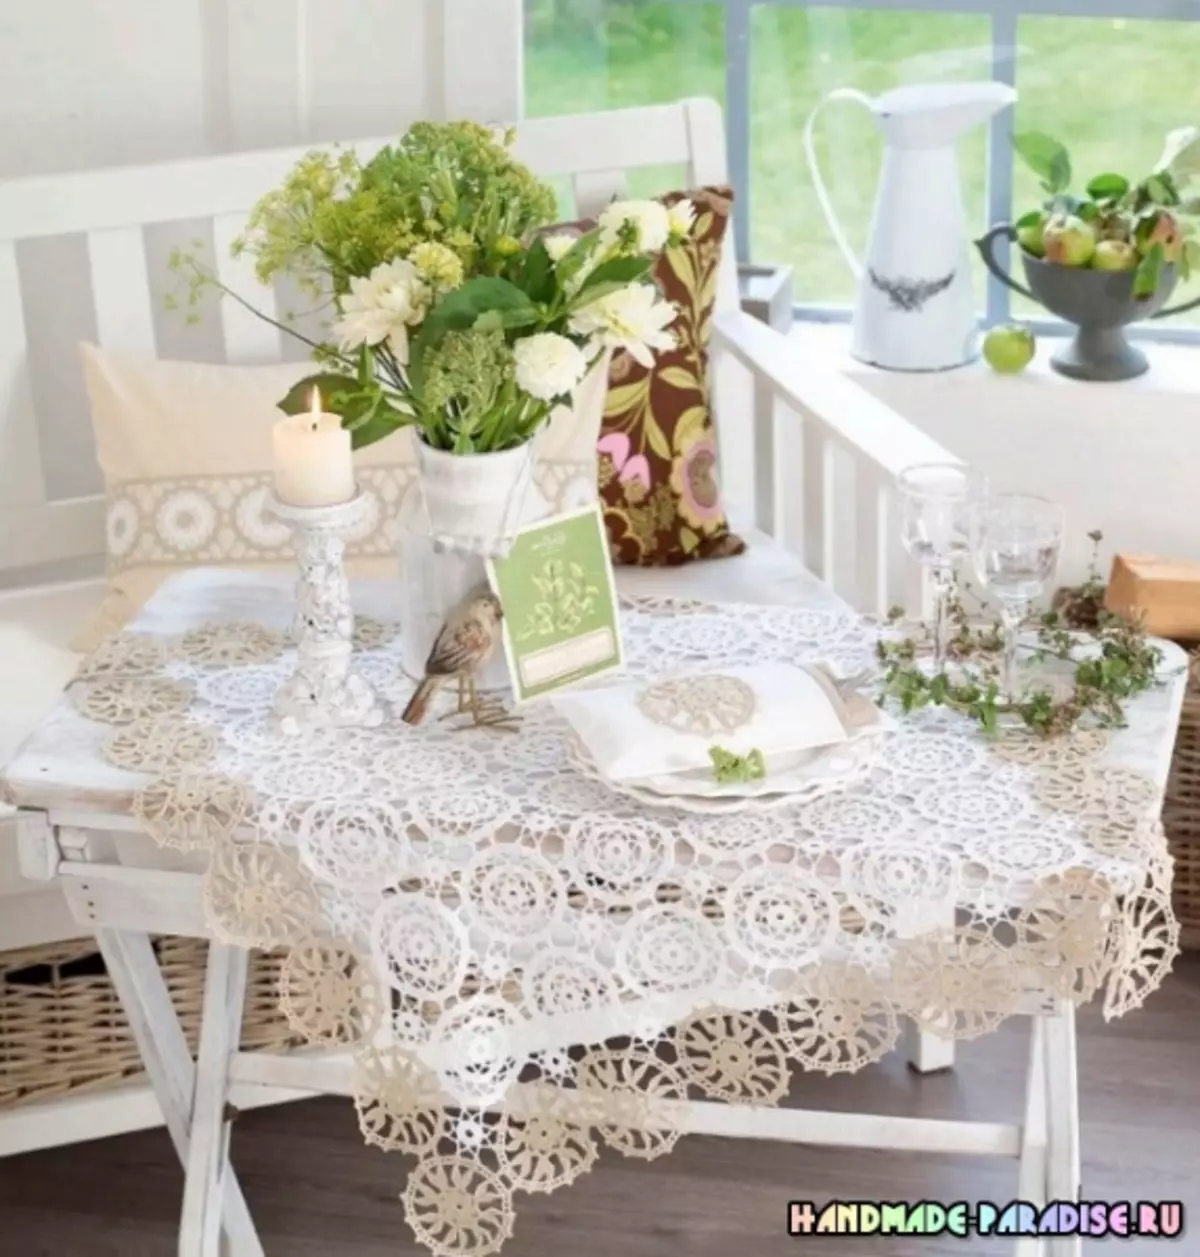 Decorating pillows with lace crochet. Schemes